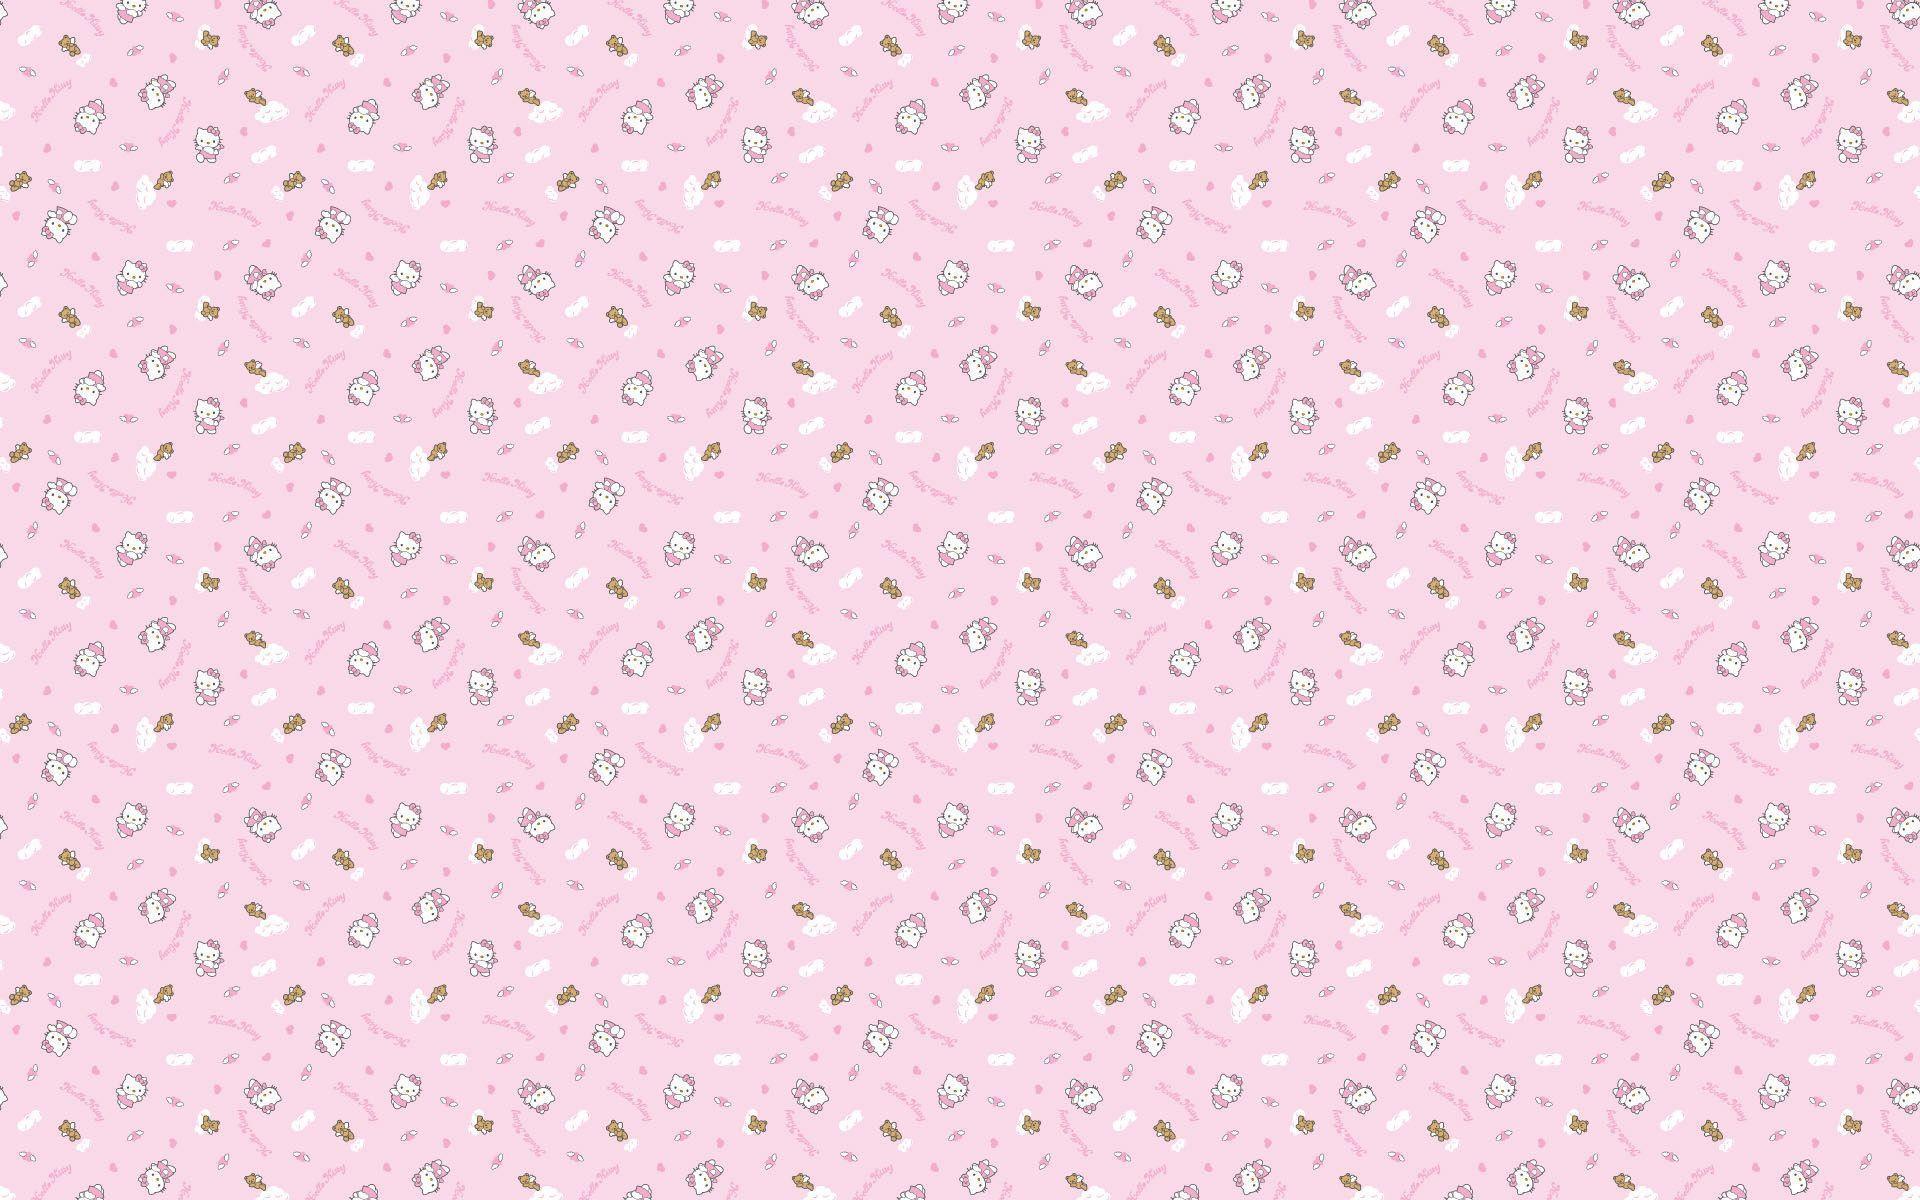 Download Baground Hello Kitty Pink Wallpaper 1920x1200. Full HD